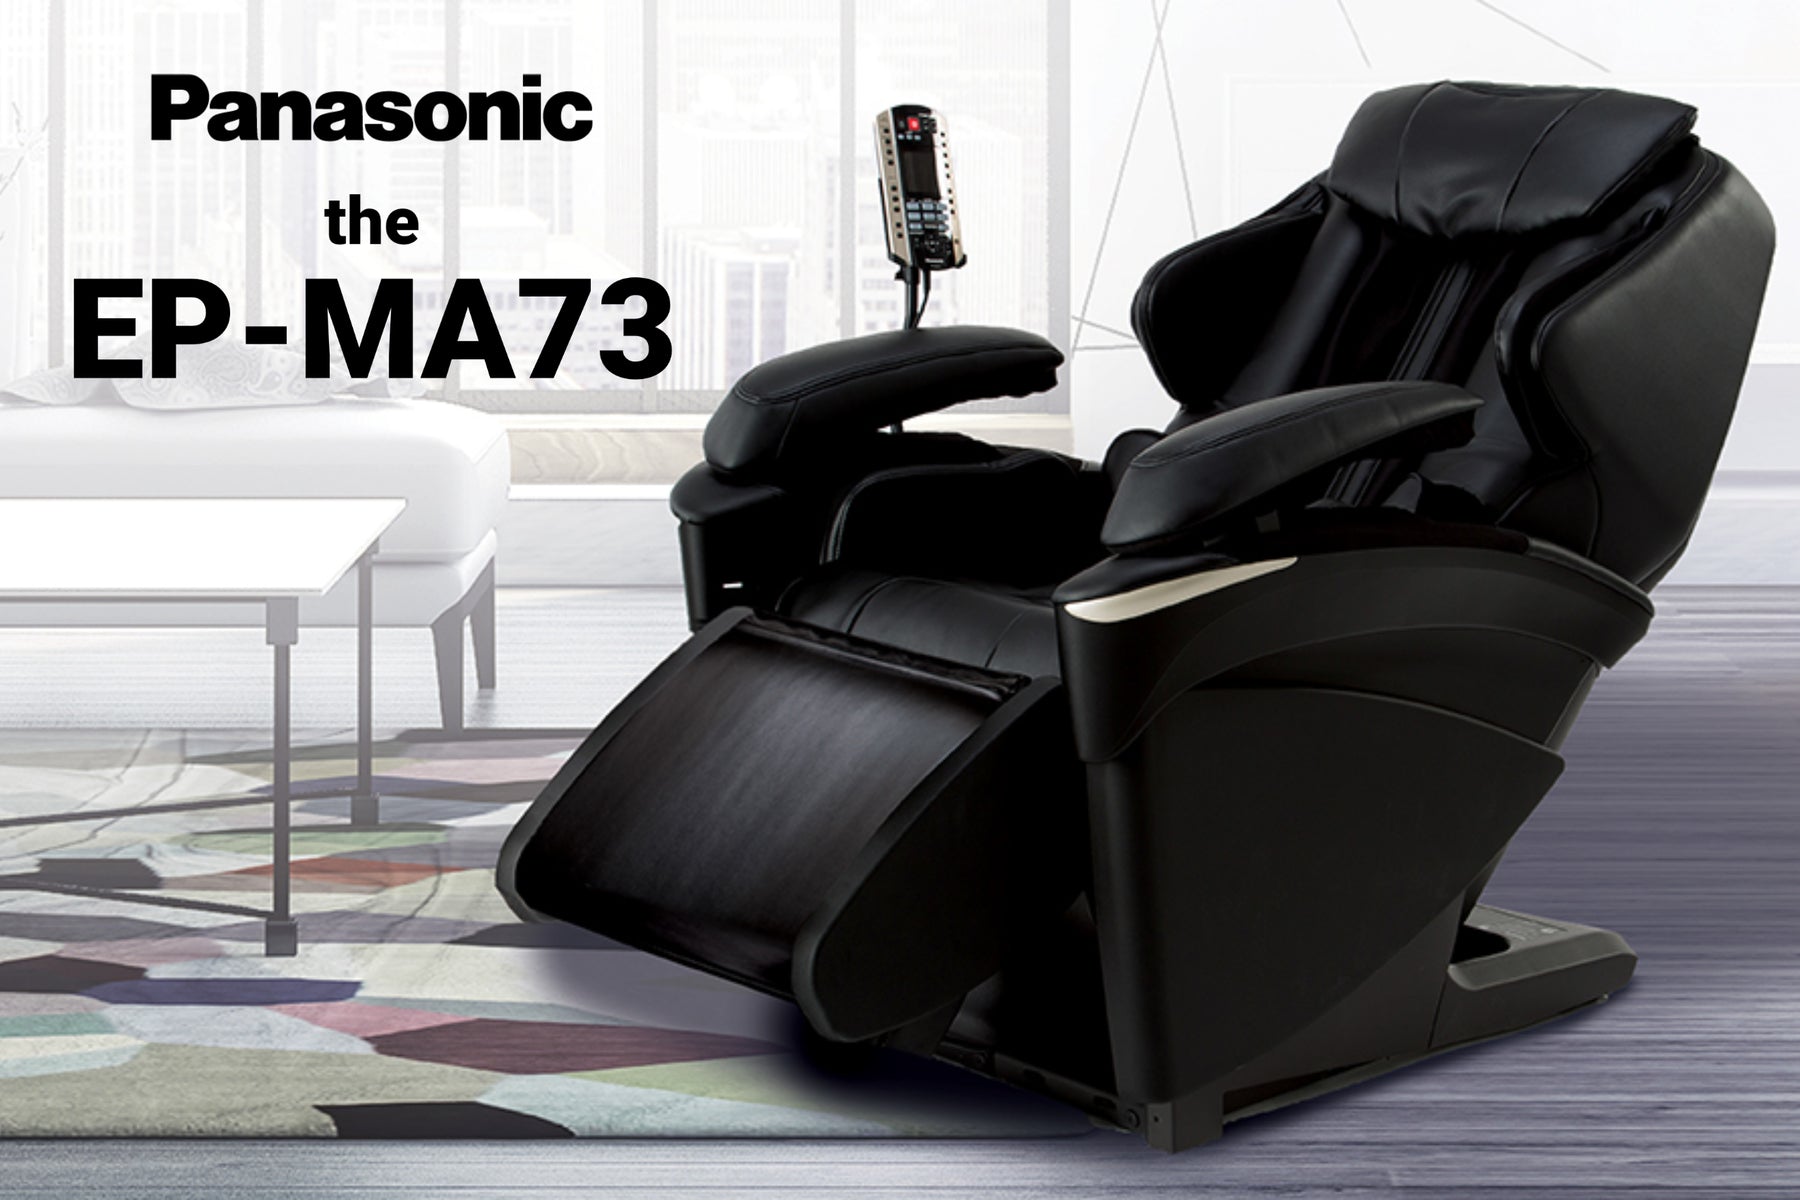 What's New with the Panasonic EP-MA73 Real Pro Ultra Massage Chair